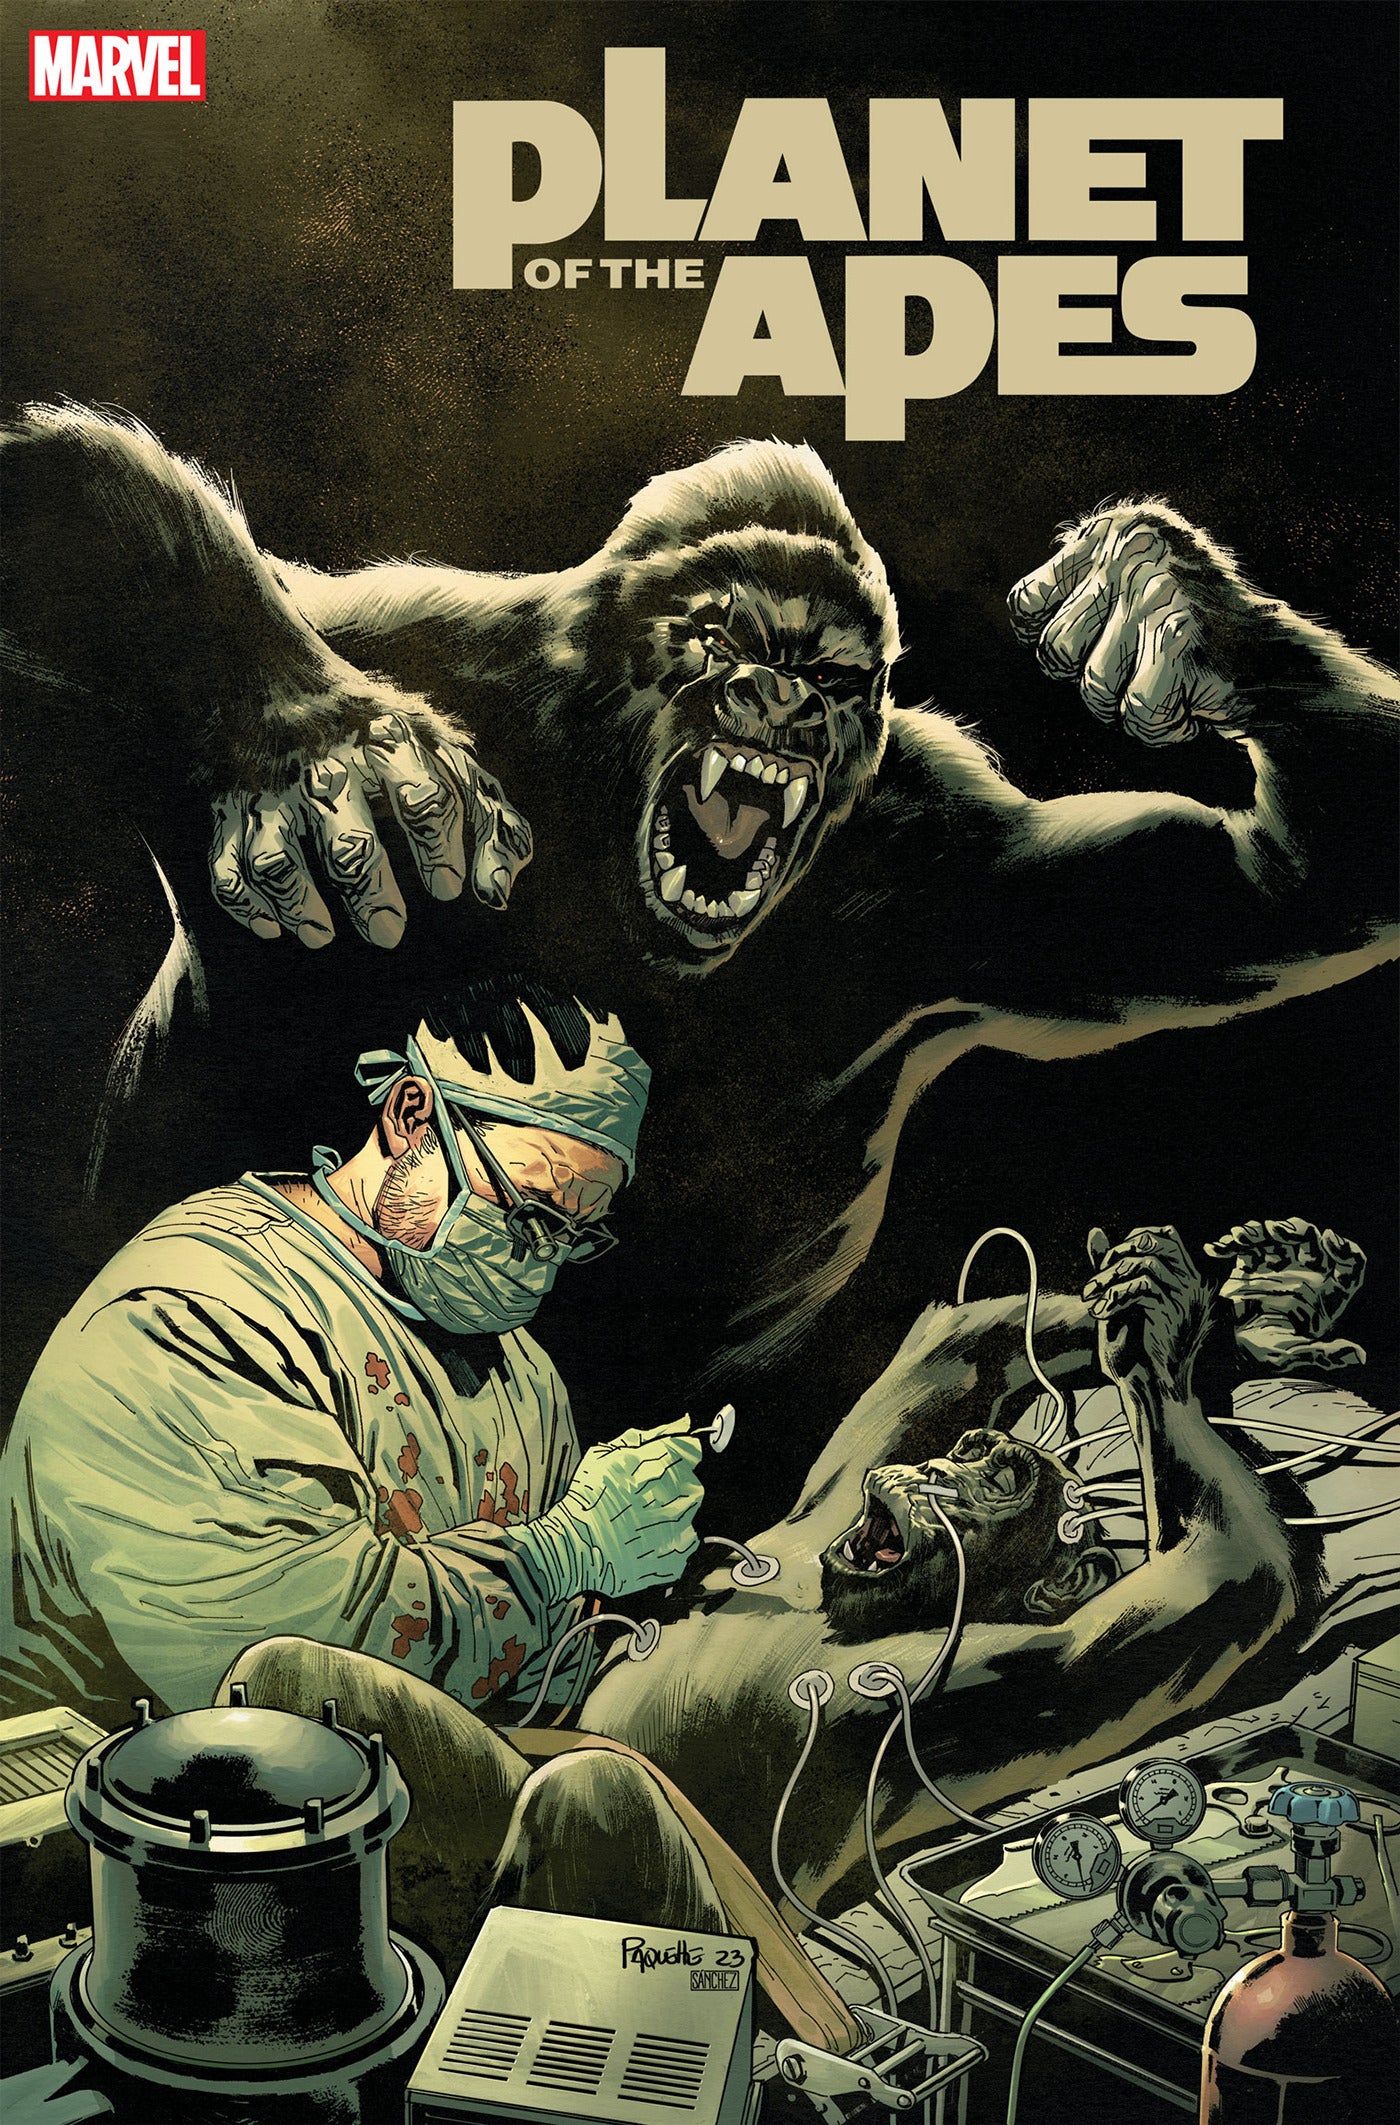 PLANET OF THE APES 1 PAQUETTE VARIANT